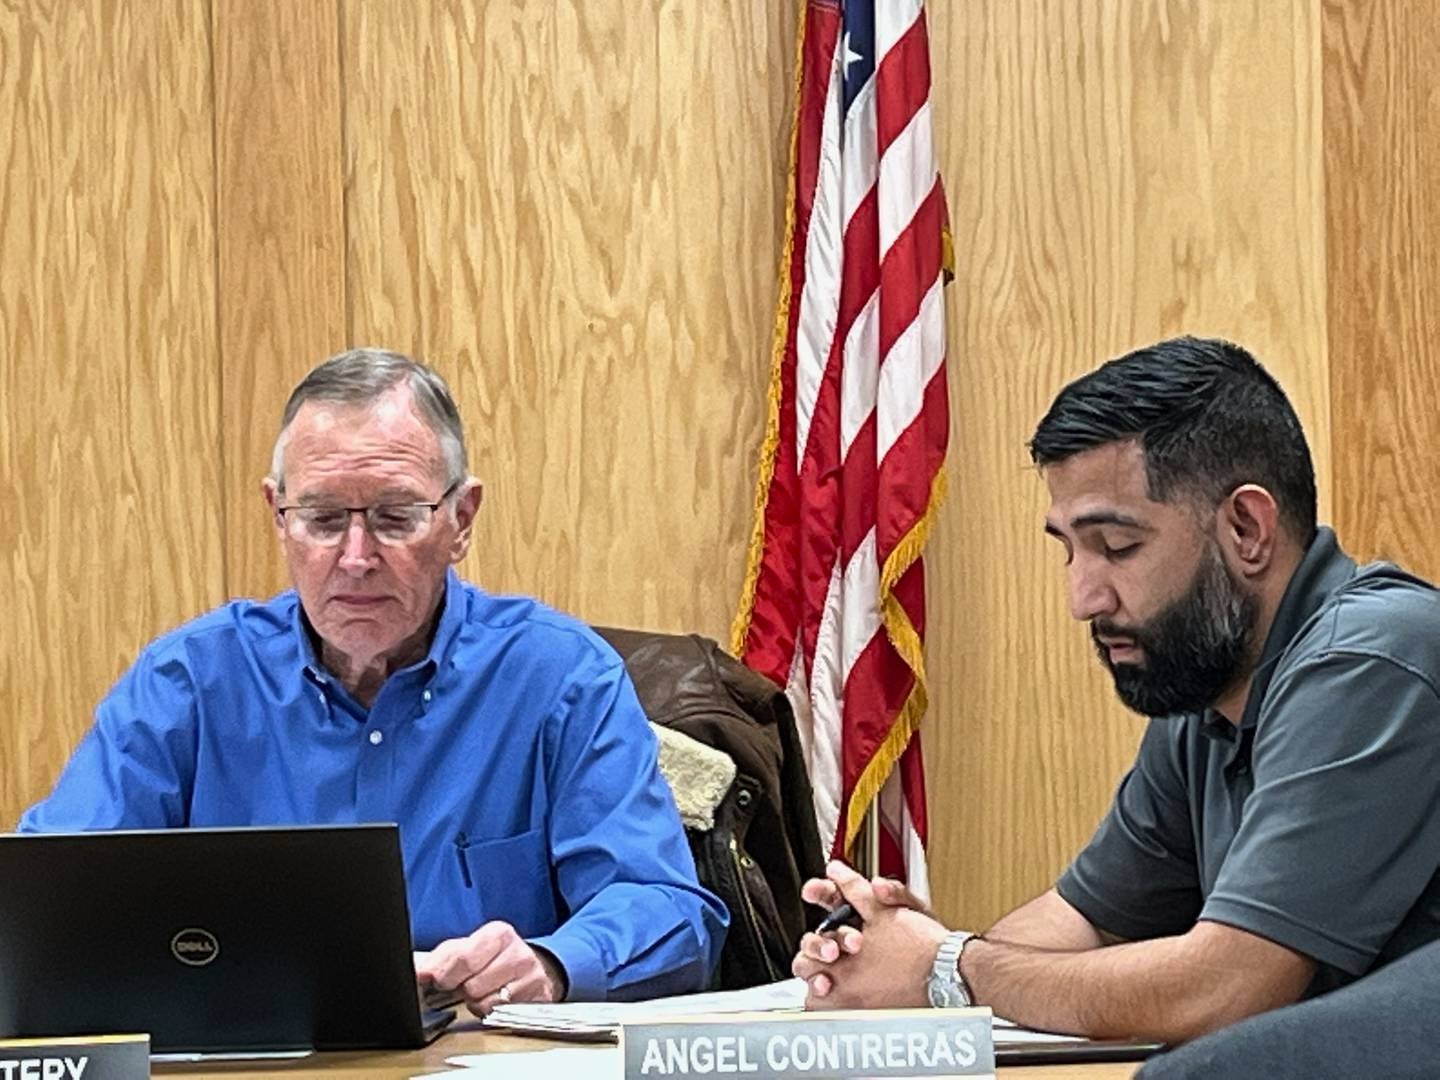 Joliet Township Trustee Ray Slattery (right) and Joliet Township Supervisor Angel Contreras at the township board meeting on Tuesday, March 8, 2021.